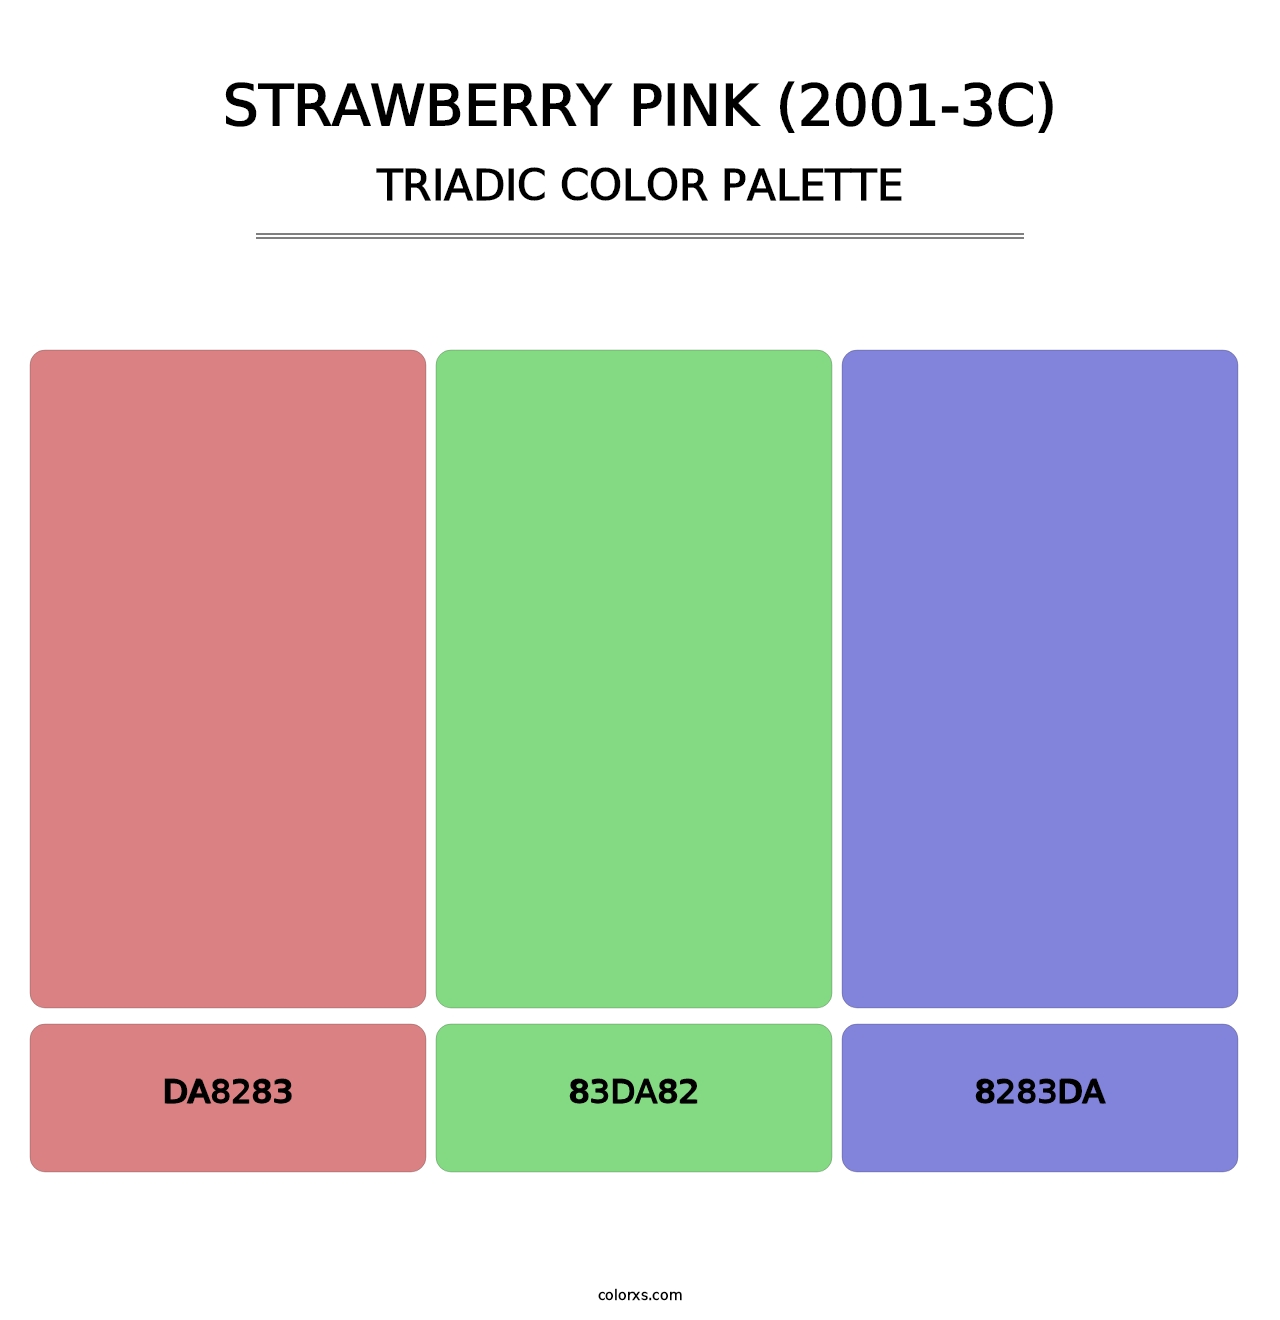 Strawberry Pink (2001-3C) - Triadic Color Palette